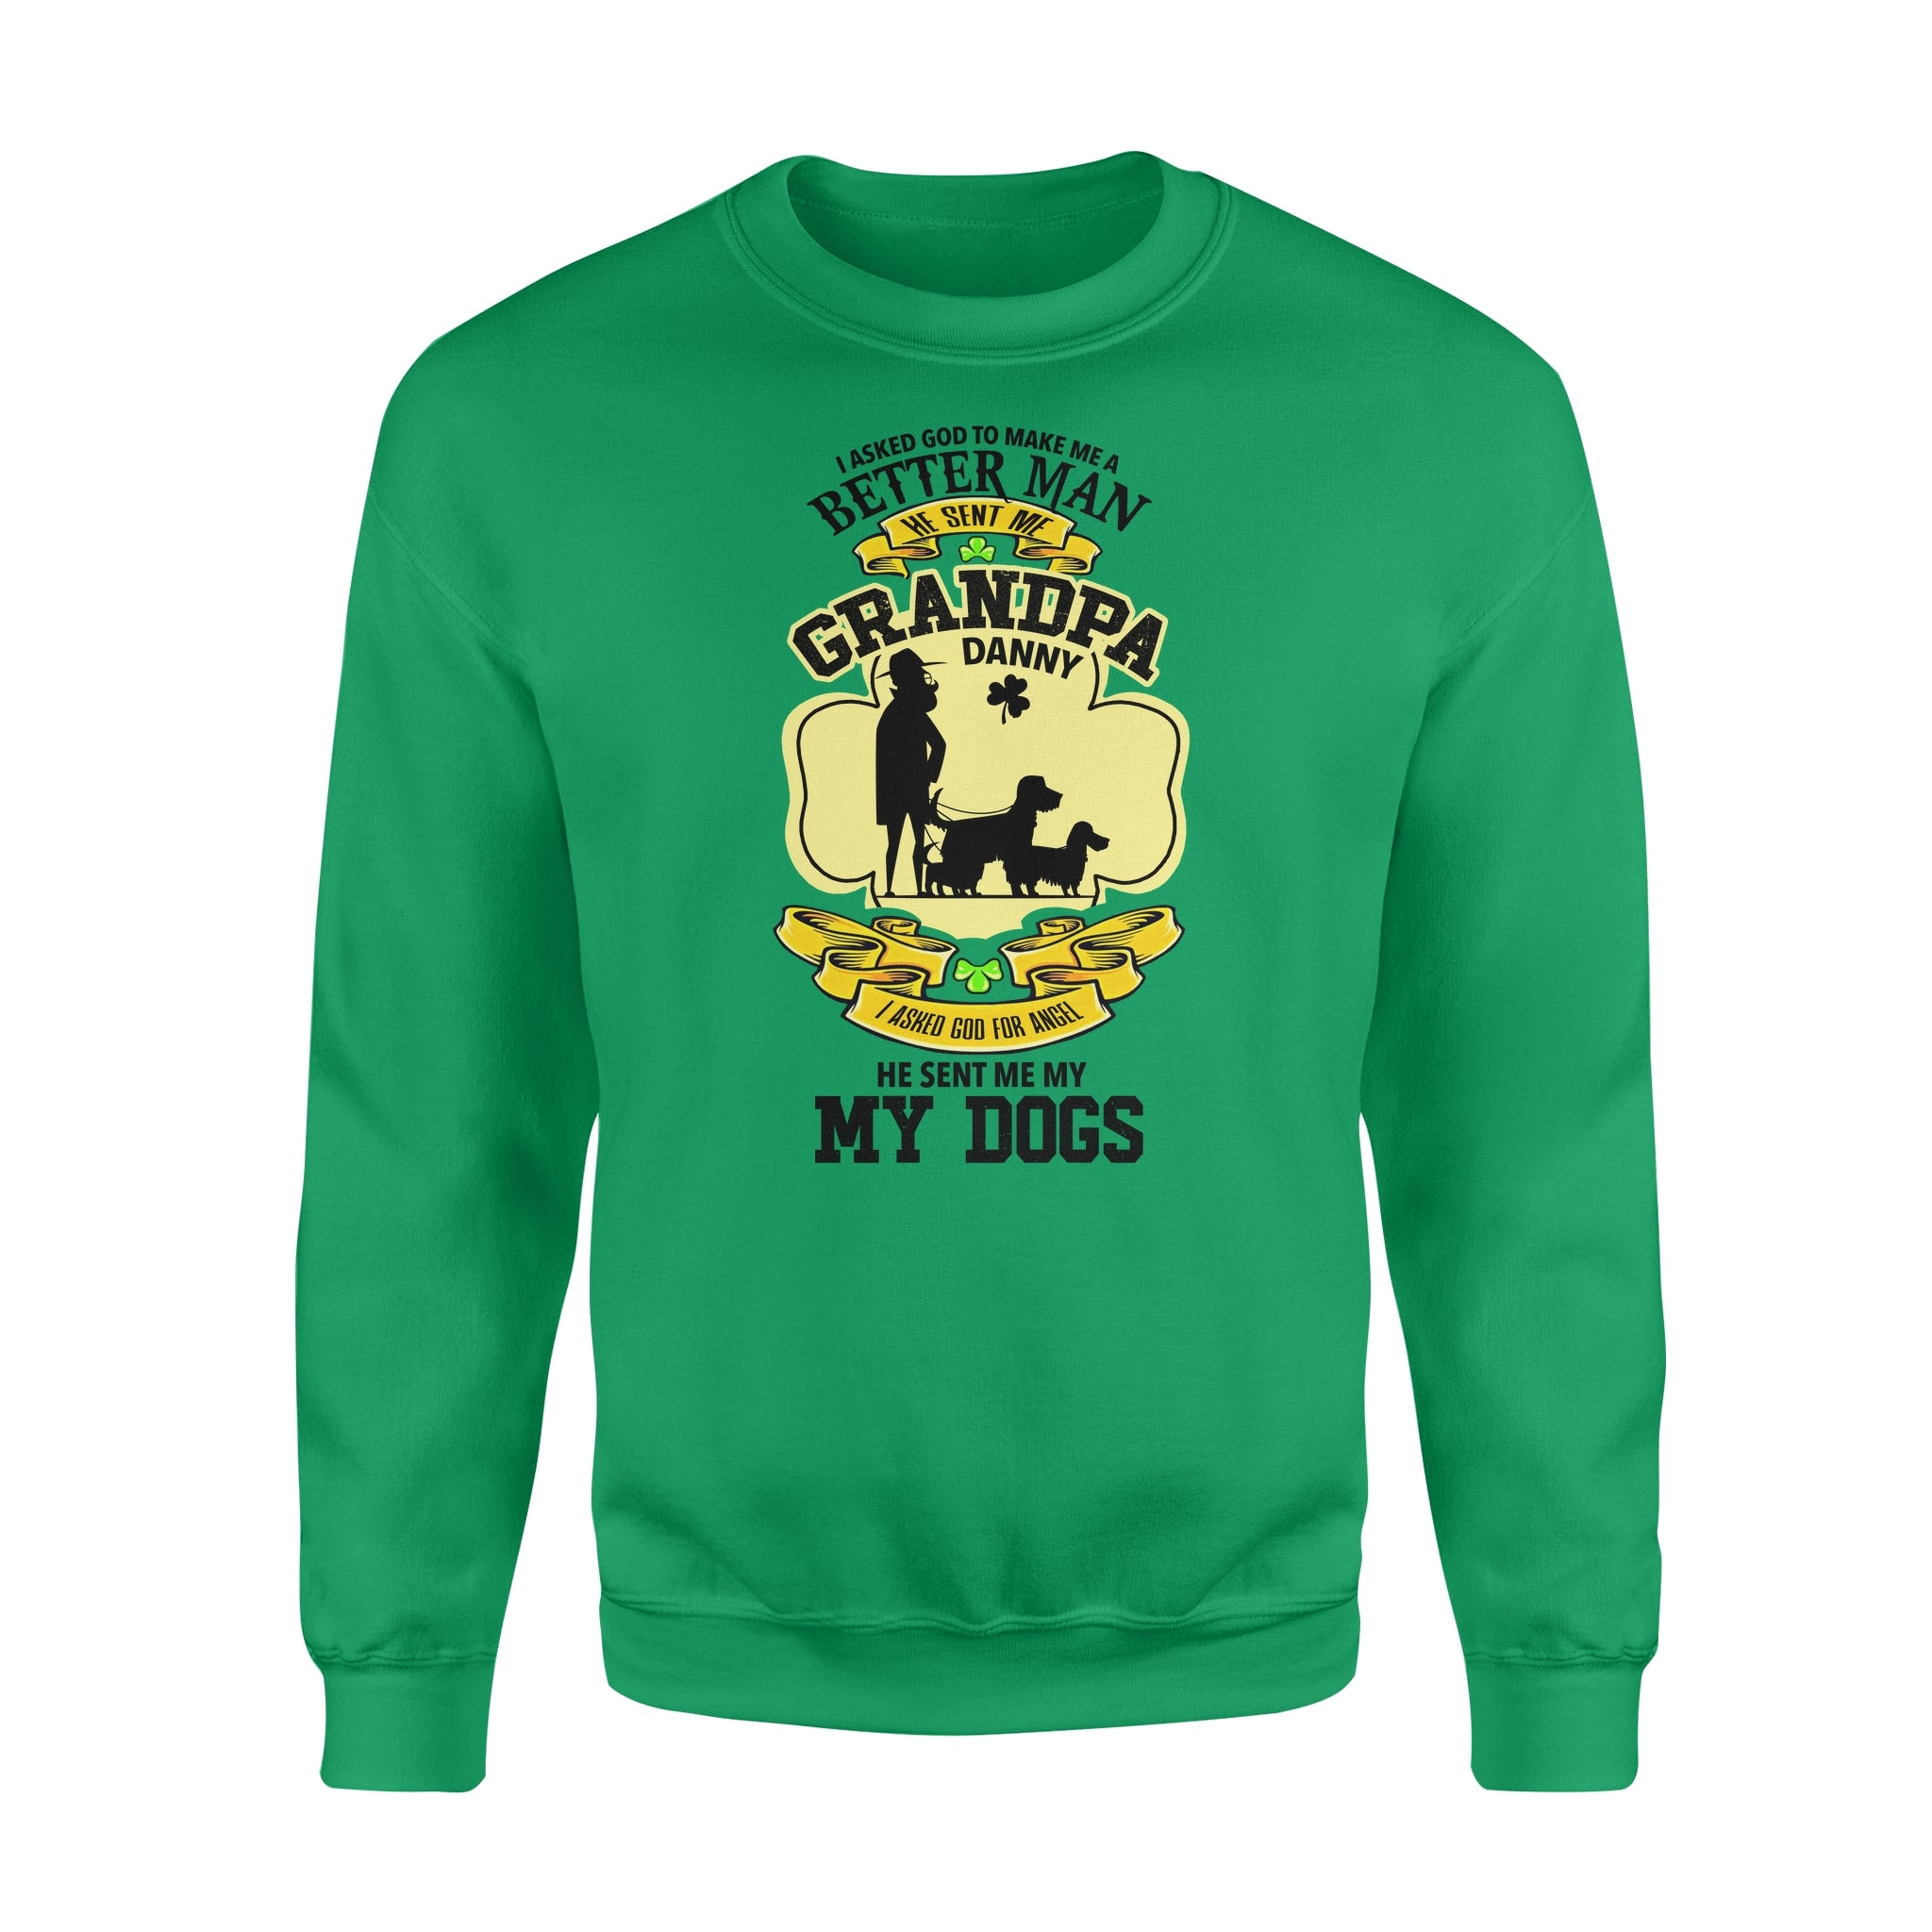 Personalized St. Patrick Gift Idea - I Asked God To Make Me A Better Man For Grandpa - Standard Crew Neck Sweatshirt